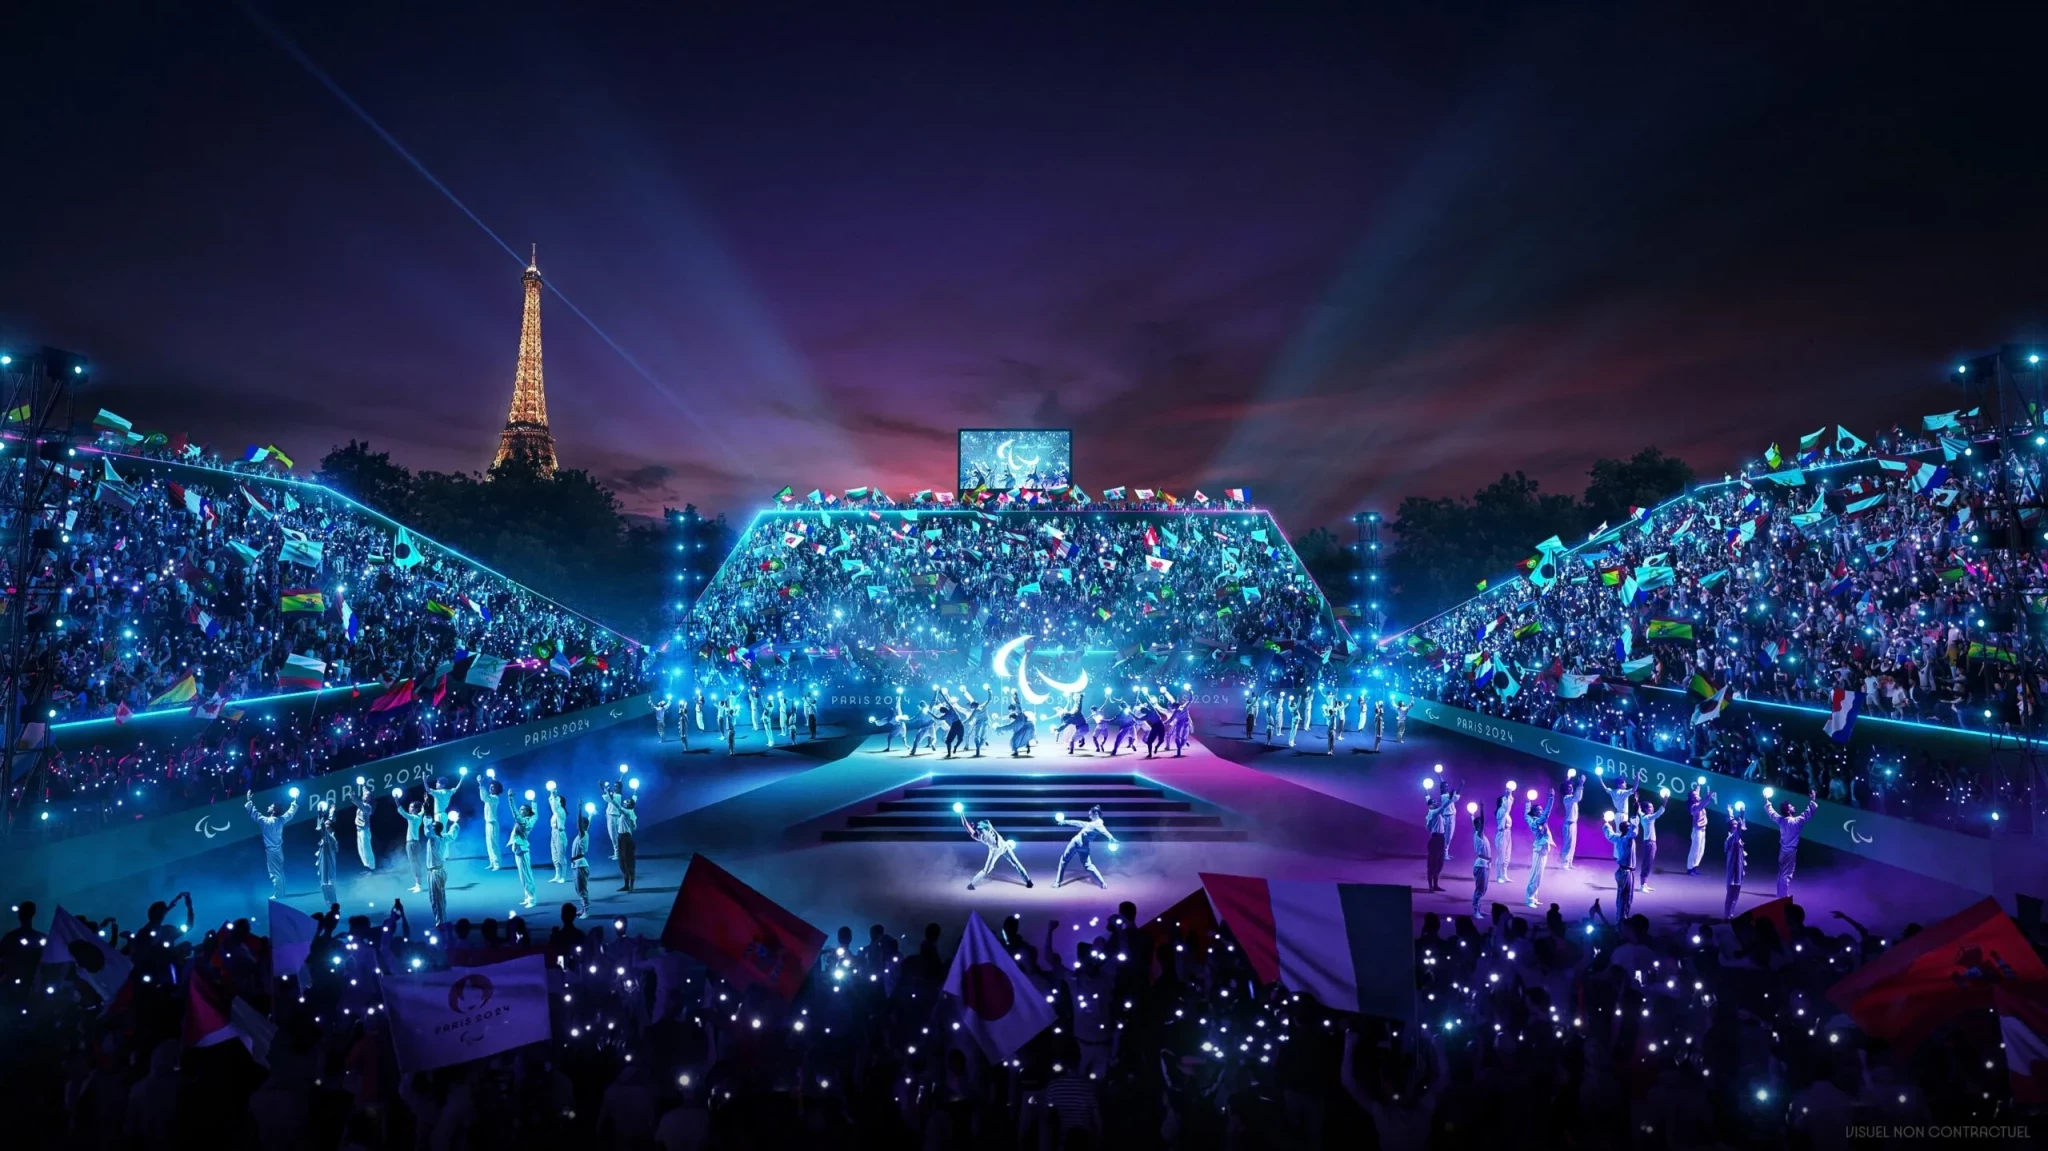 Thomas Jolly wants to ensure the Paralympic Games Opening Ceremony is different to that of the Olympic Games' while still maintaining similar elements ©Paris 2024